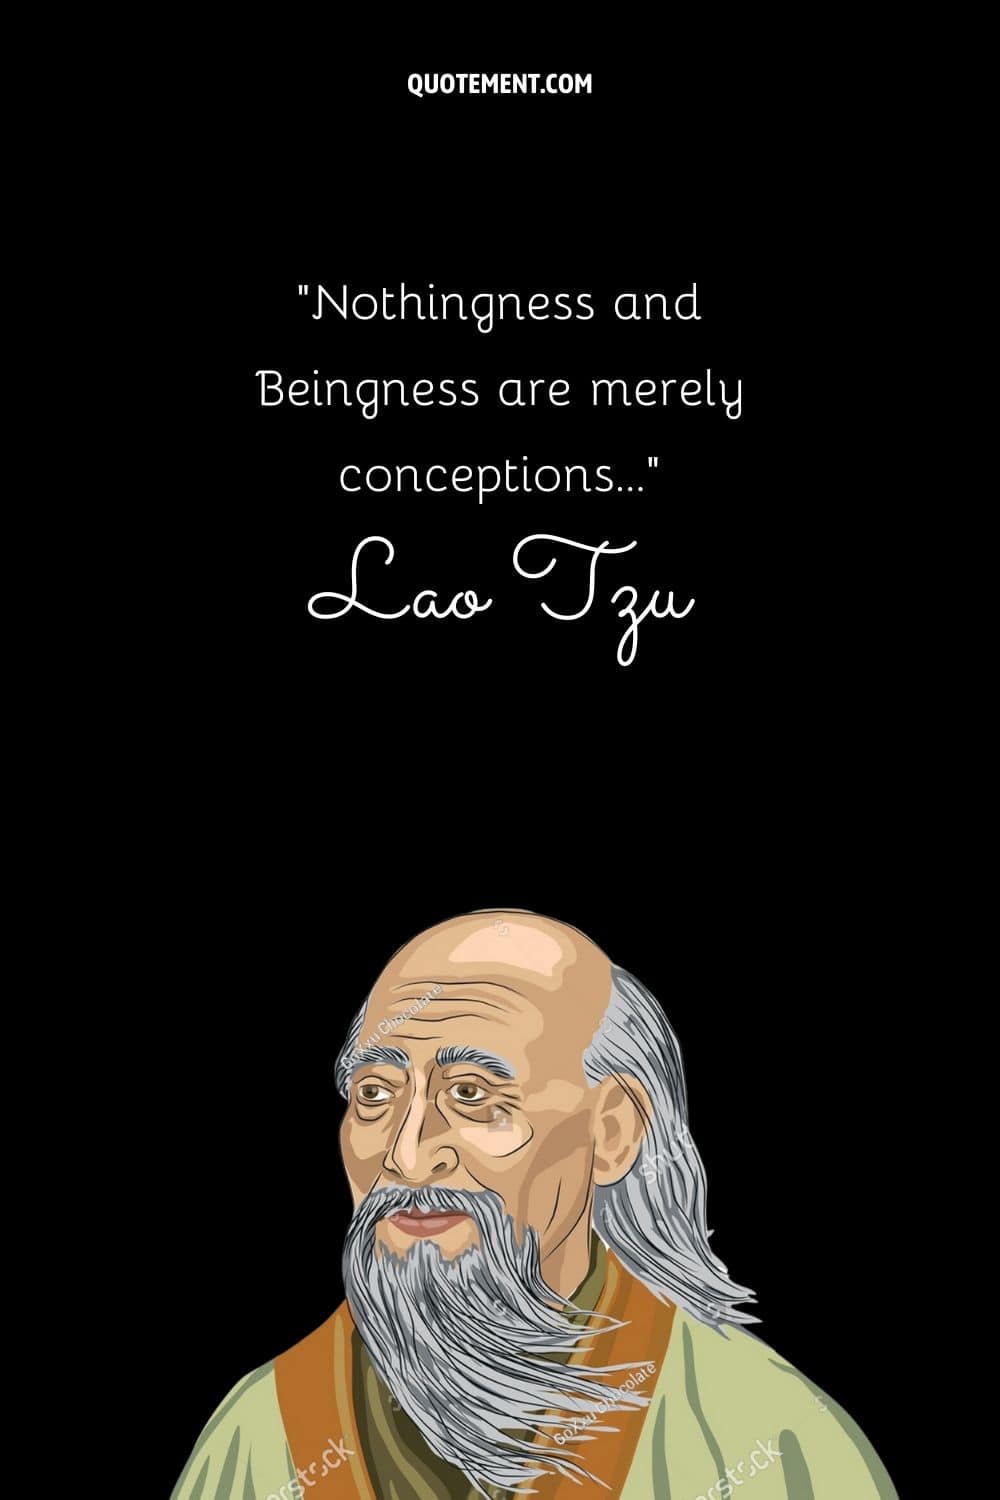 Nothingness and Beingness are merely conceptions.